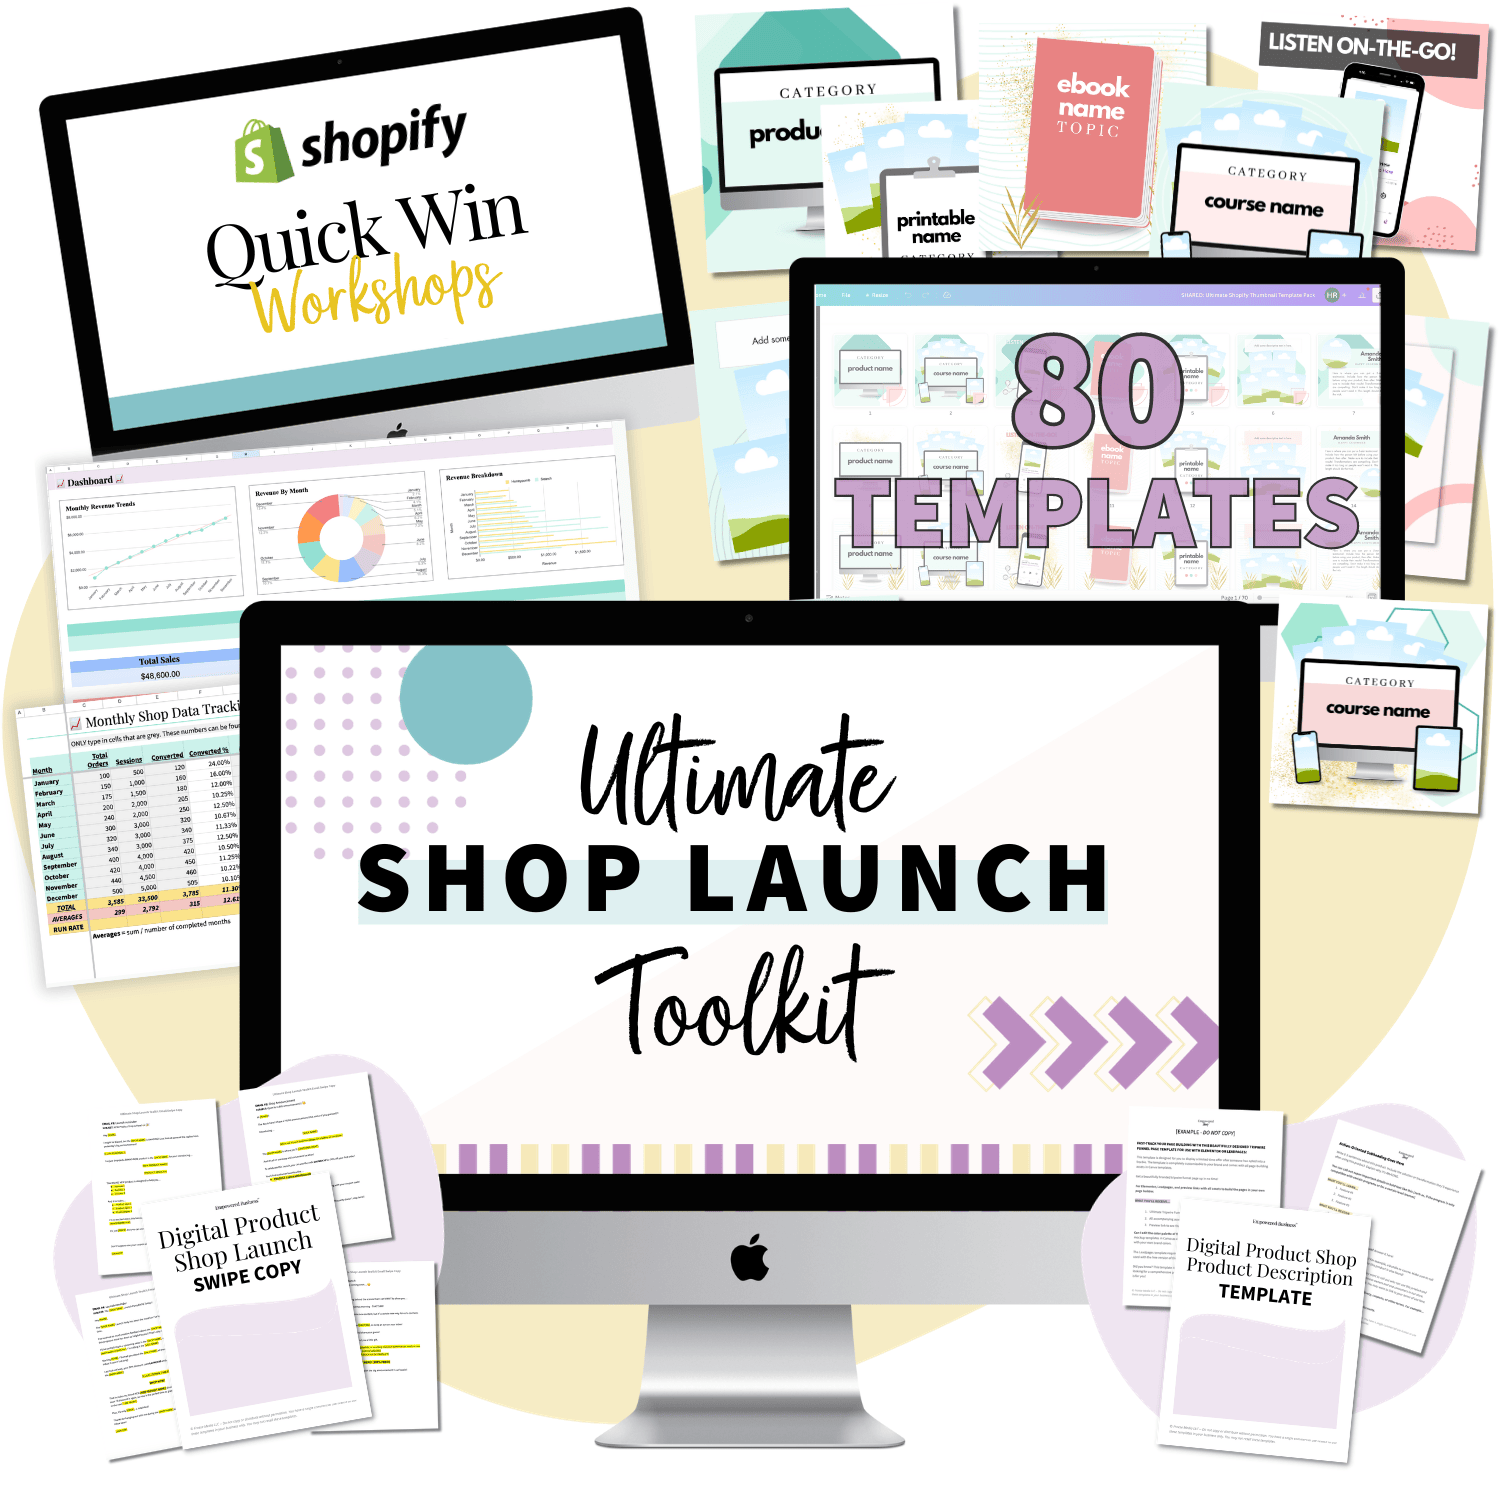 mockup of ultimate shop launch toolkit - launch your digital product shop with trainings and templates